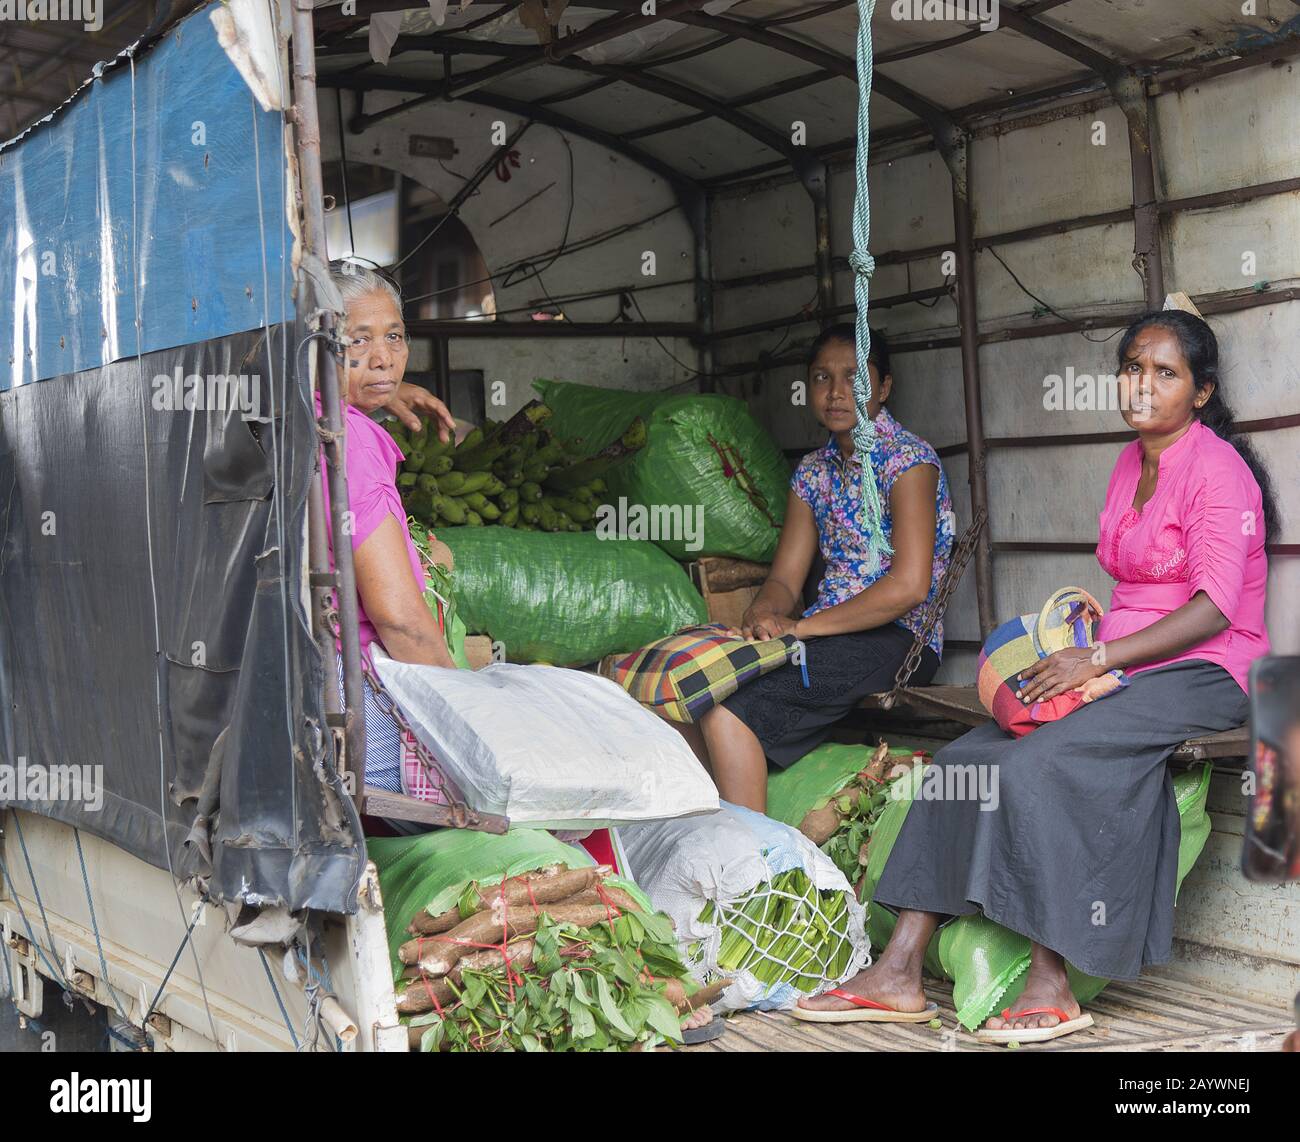 Dambulla, Sri Lanka: 18/03/2019: Women workers at wholesale vegetable market sitting in the rear of a truck with sacks of vegetable produce. Stock Photo